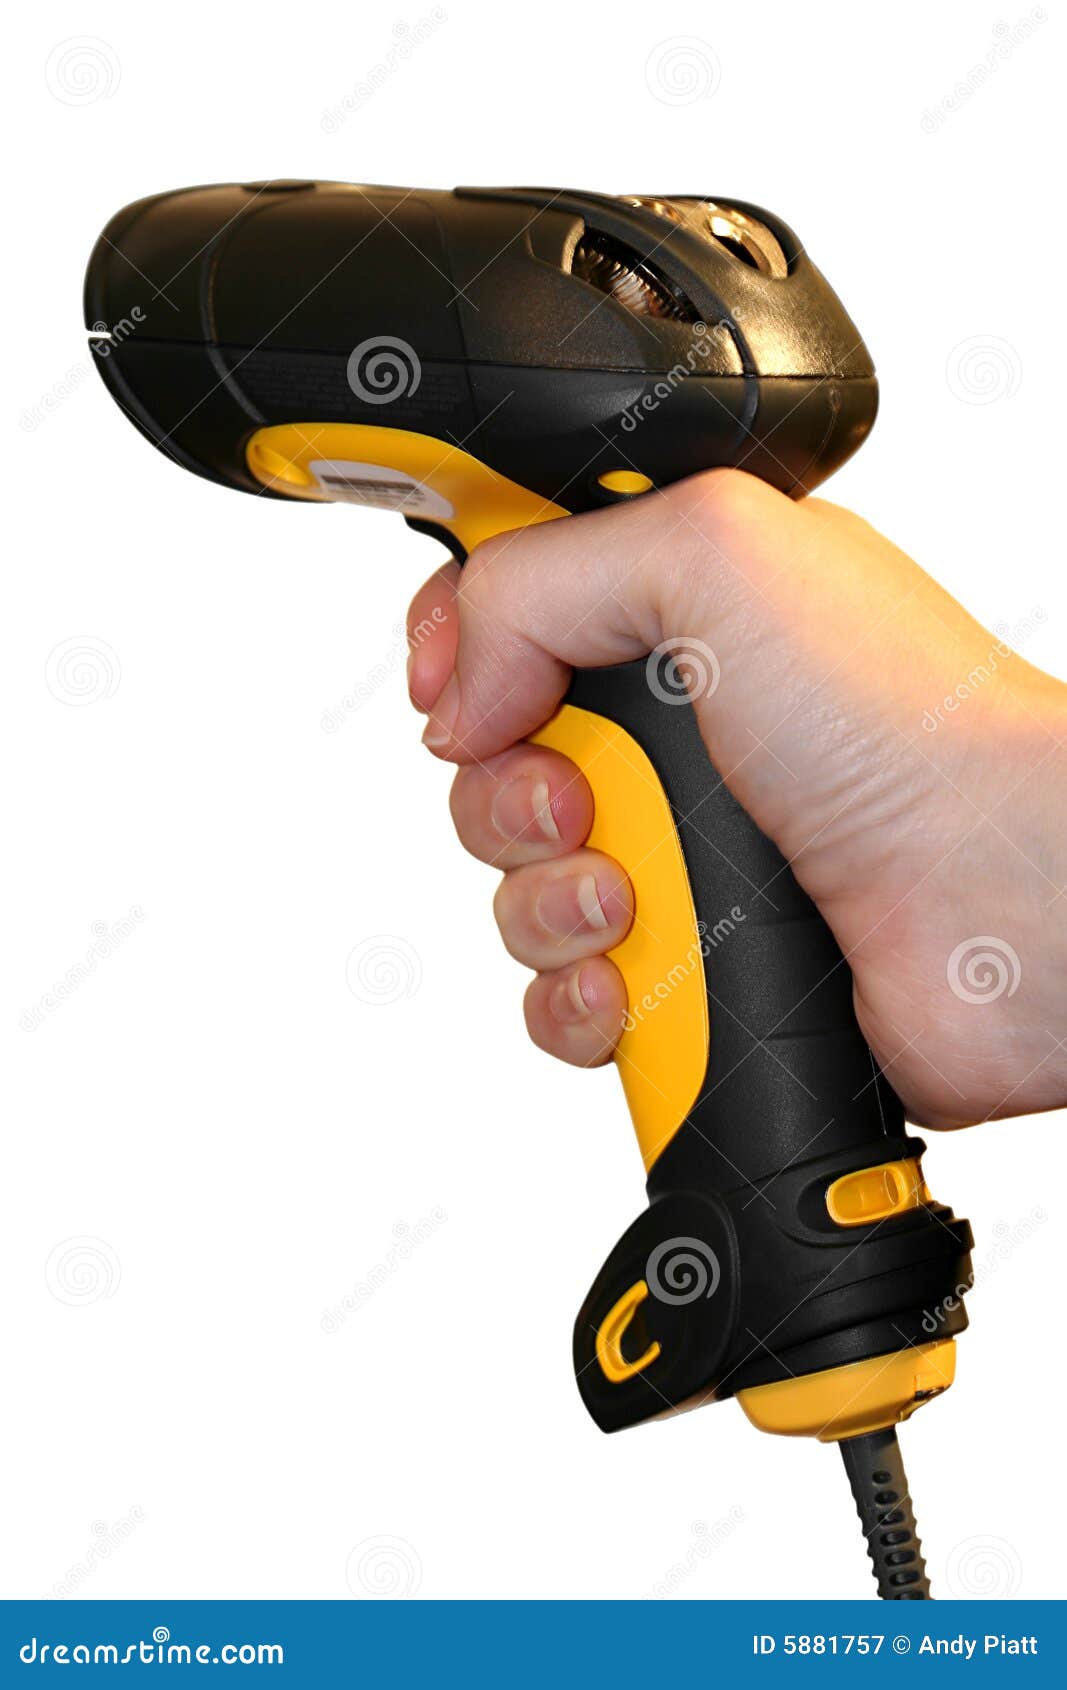 barcode scanner clipart - photo #42